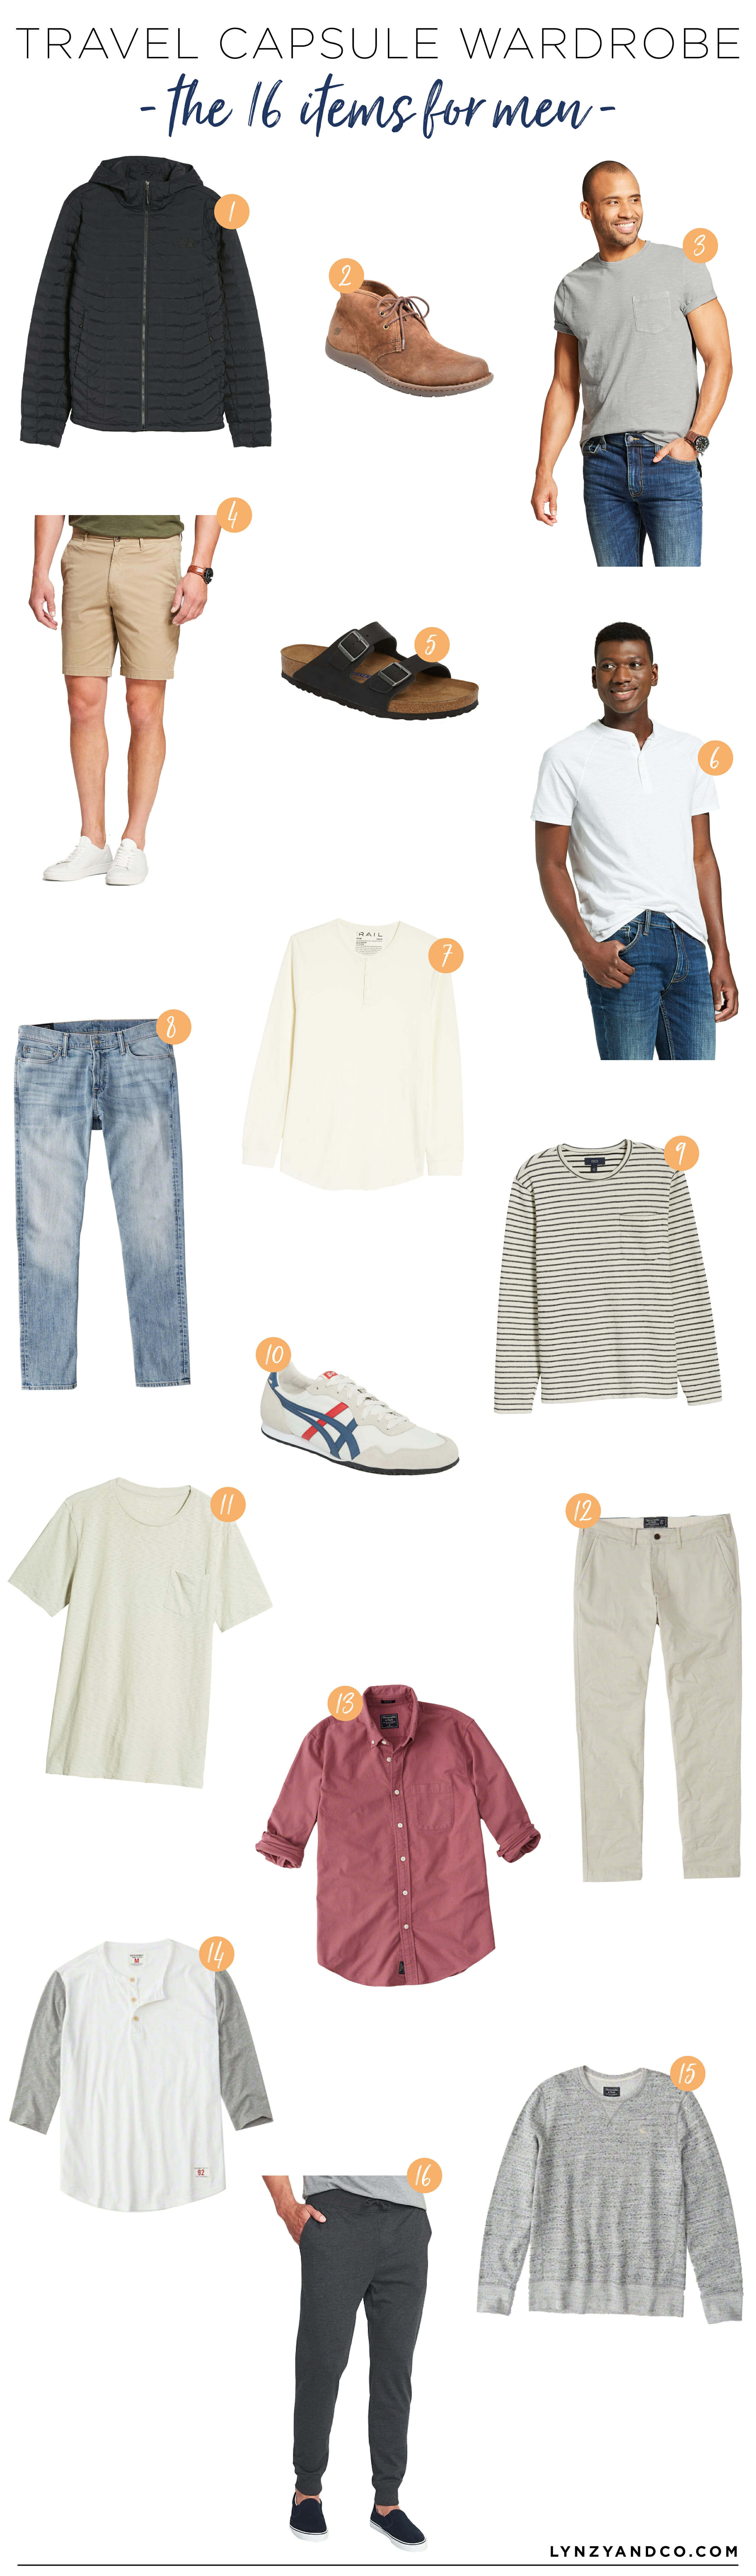 This travel capsule wardrobe for men has everything from layering sweatshirts to cozy & cool joggers! 16 items to take you from summer to fall seamlessly!